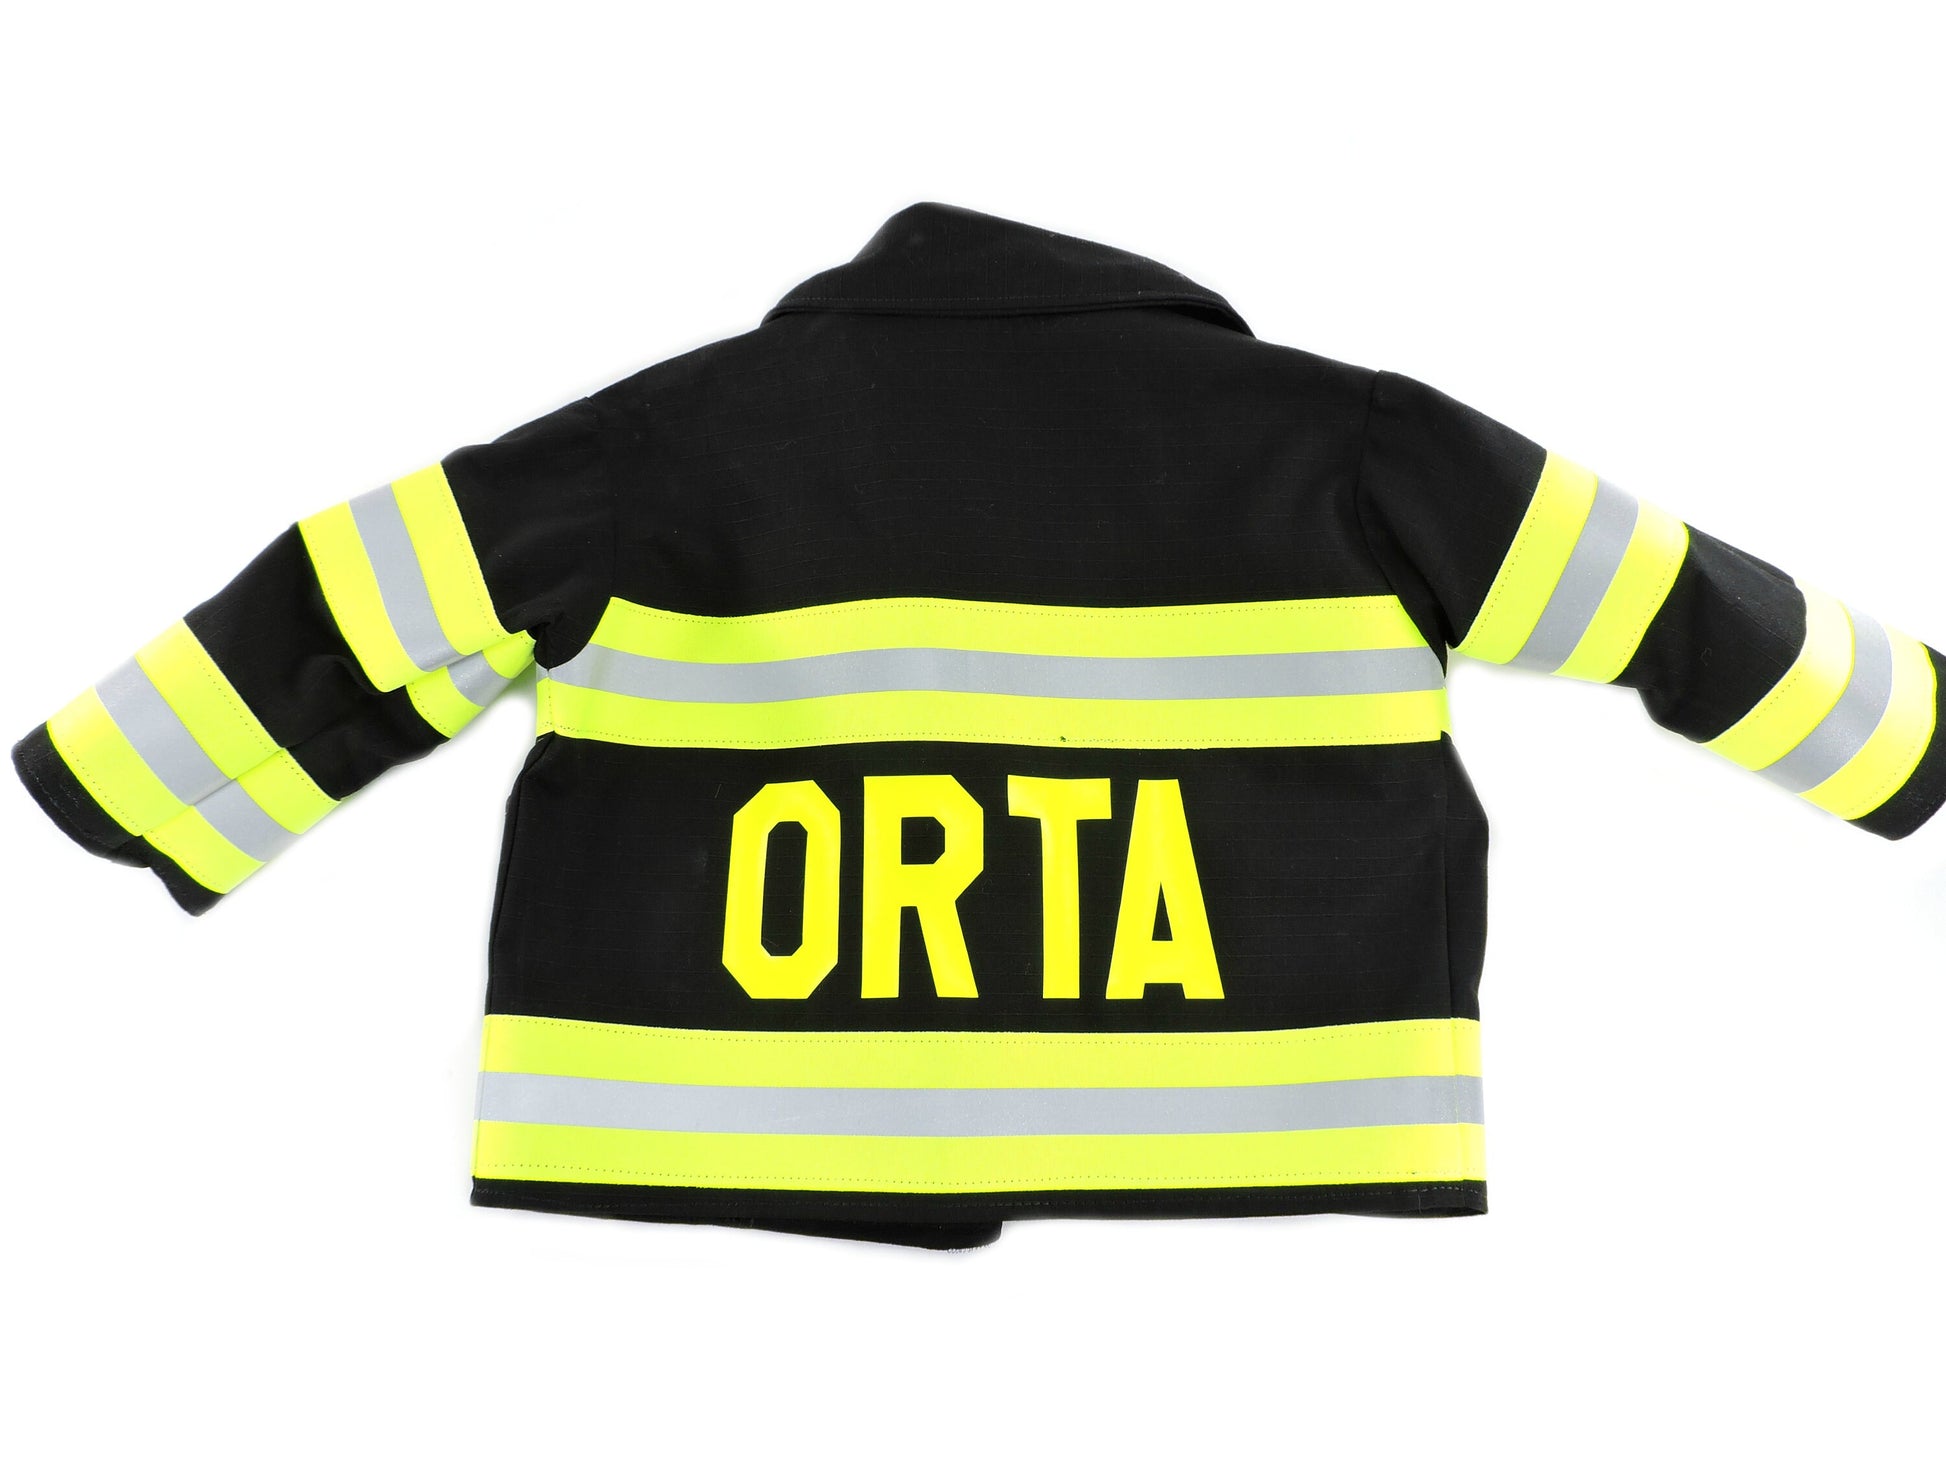 Black Fabric Neon Yellow Reflective Tape Firefighter toddler jacket  add name